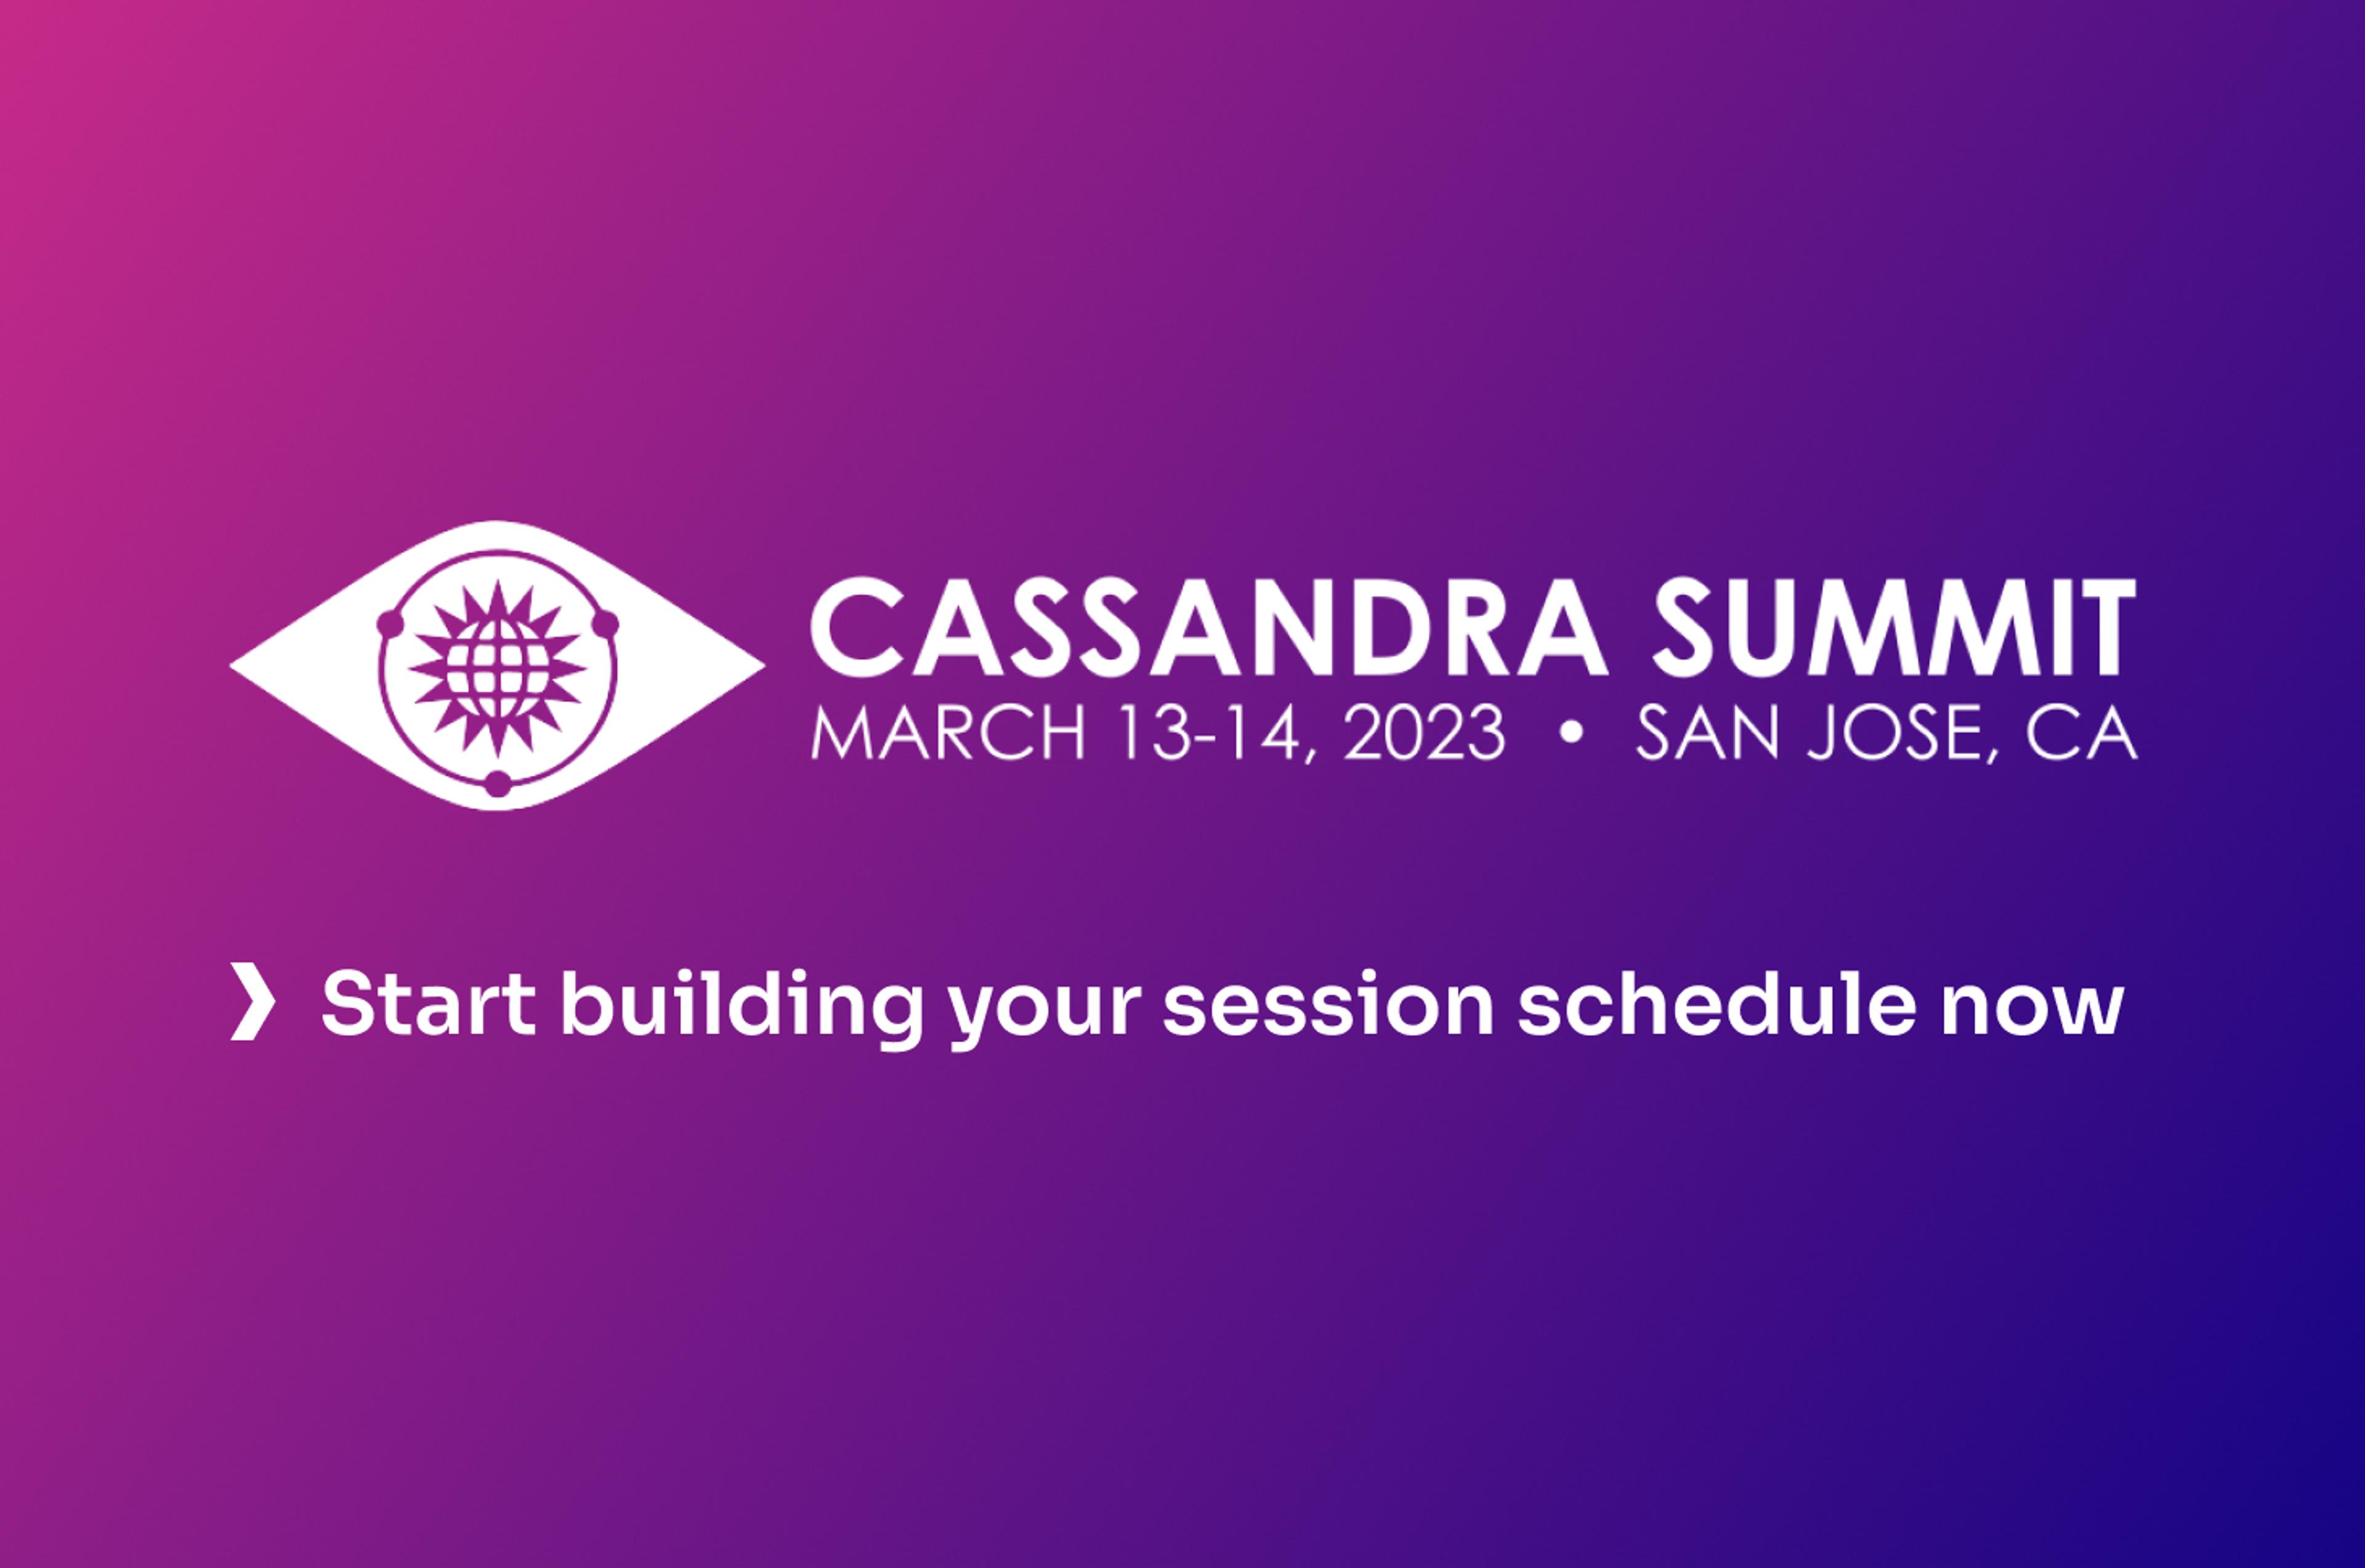 How to Get the Most Out of Cassandra Summit 2023